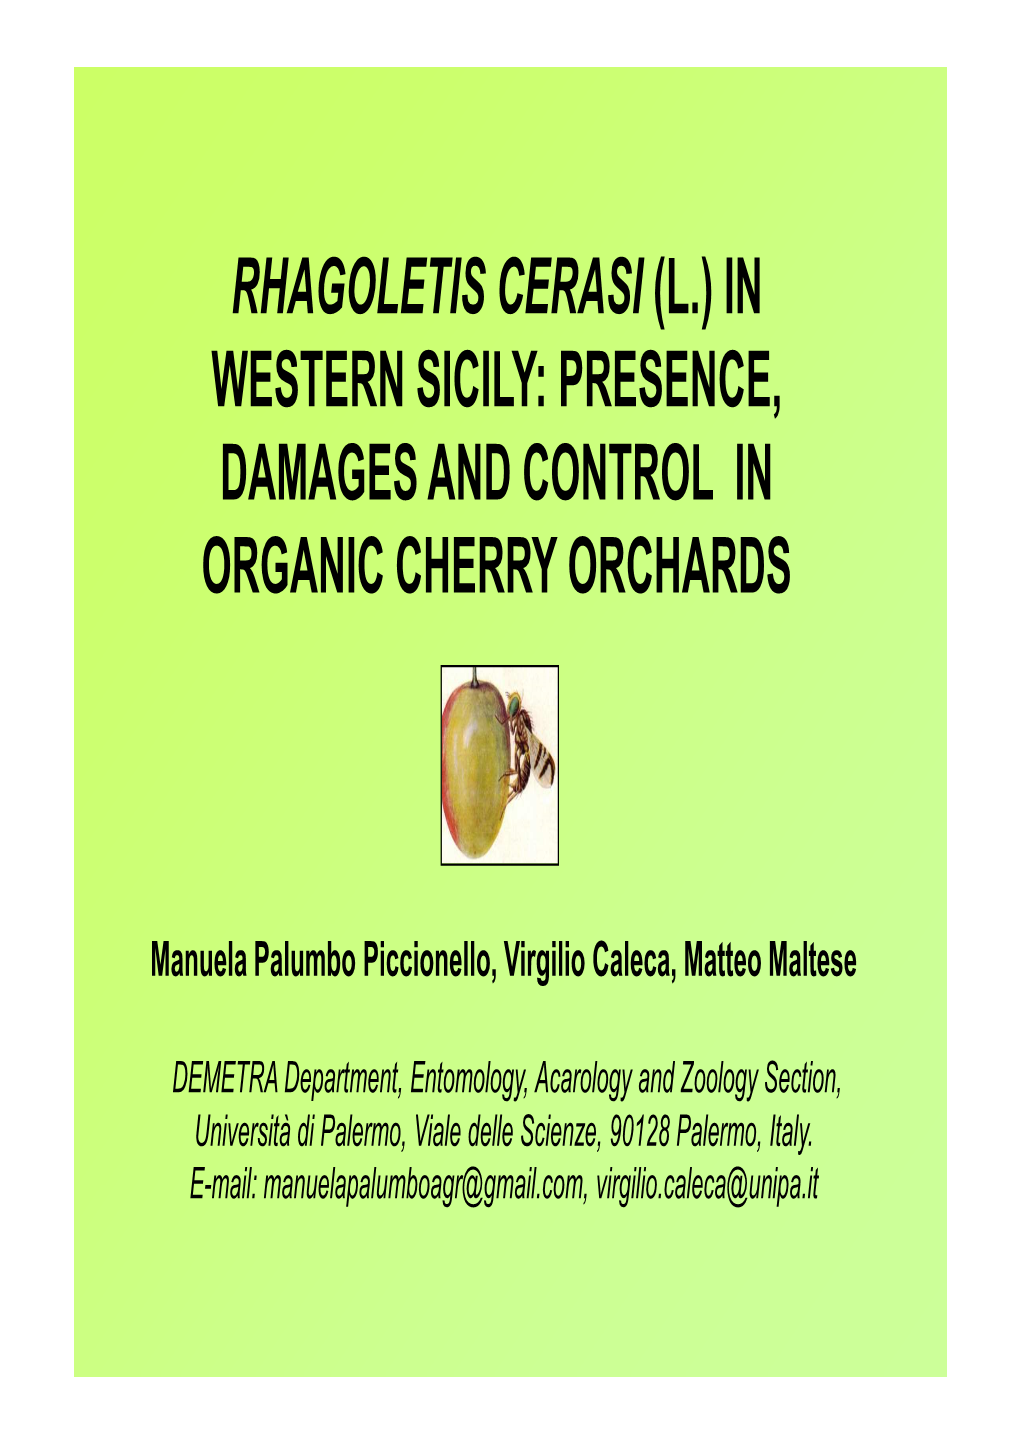 Rhagoletis Cerasi (L.) in Western Sicily: Presence, Damages and Control in Organic Cherry Orchards